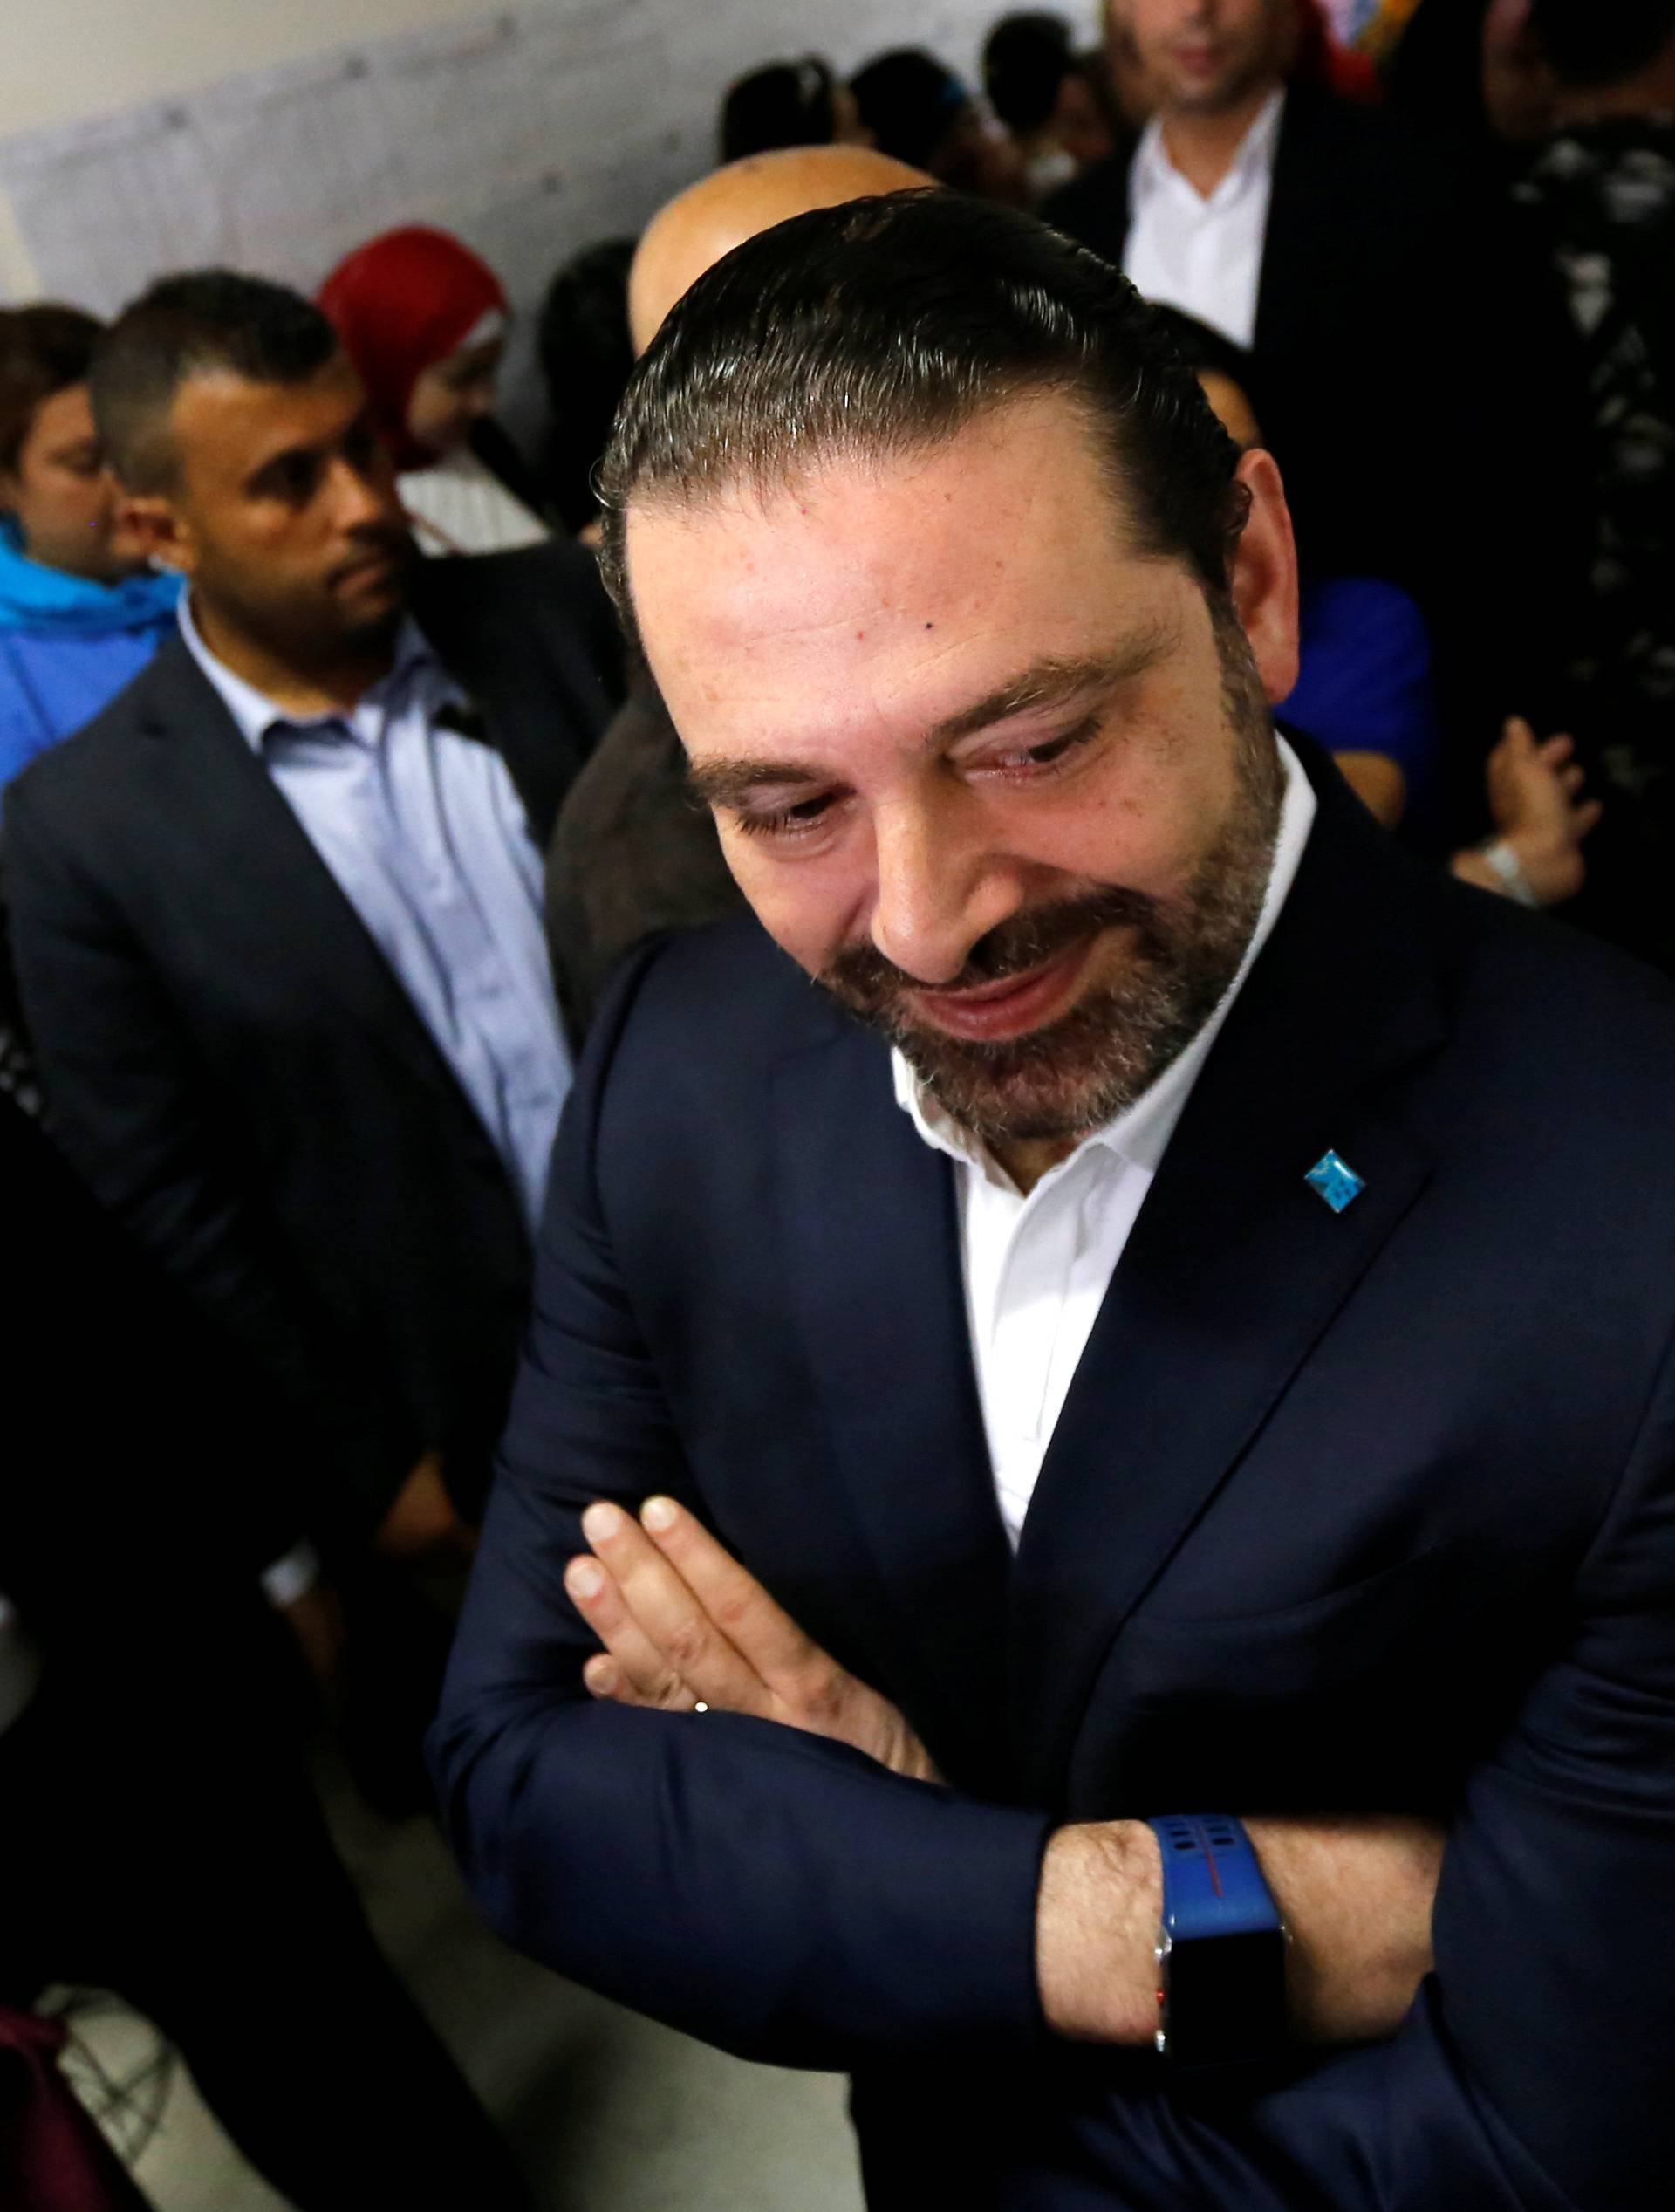 Lebanese prime minister and candidate for the parliamentary election Saad al-Hariri stands at a polling station during the parliamentary election in Beirut